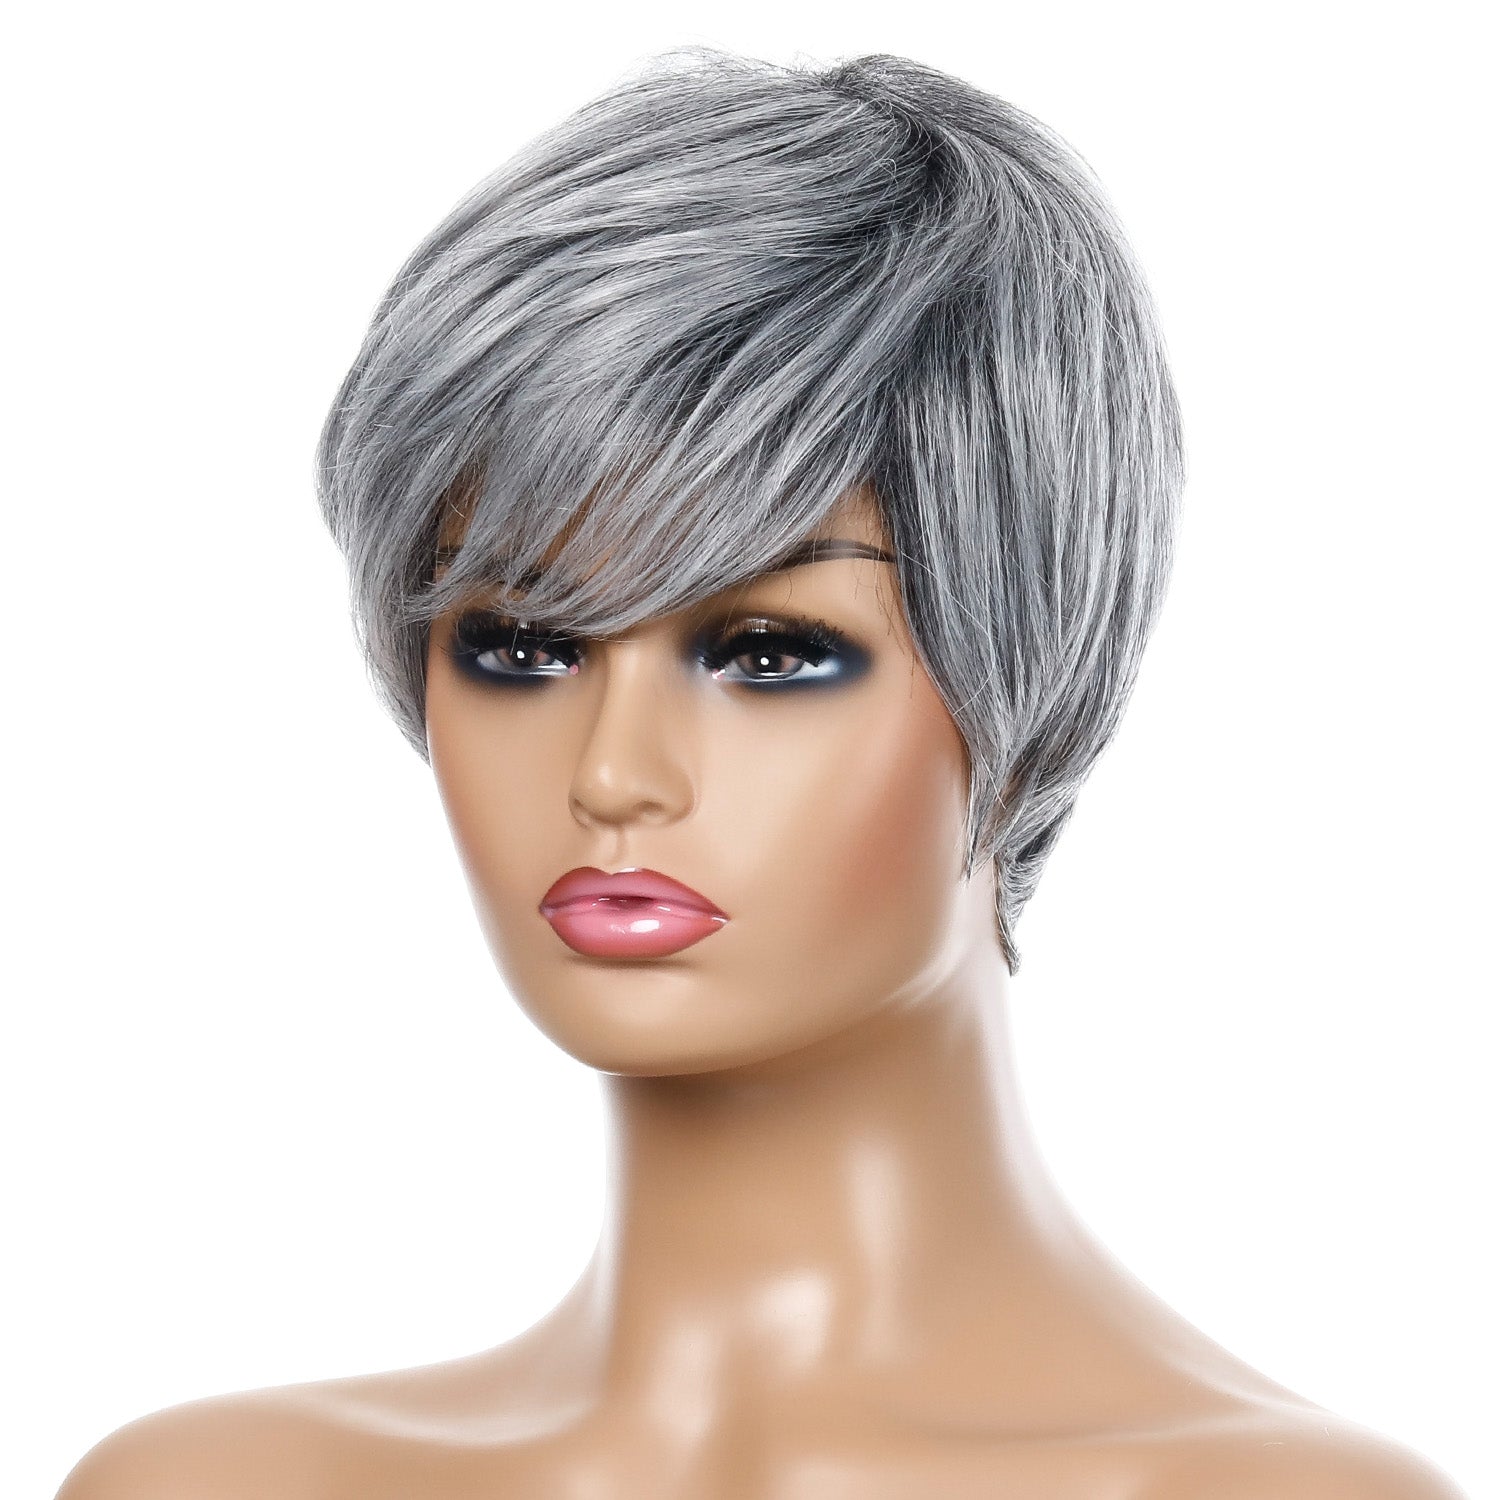 Gloria | Grey Short Pixie Cut Straight Synthetic Hair Wig With Bangs